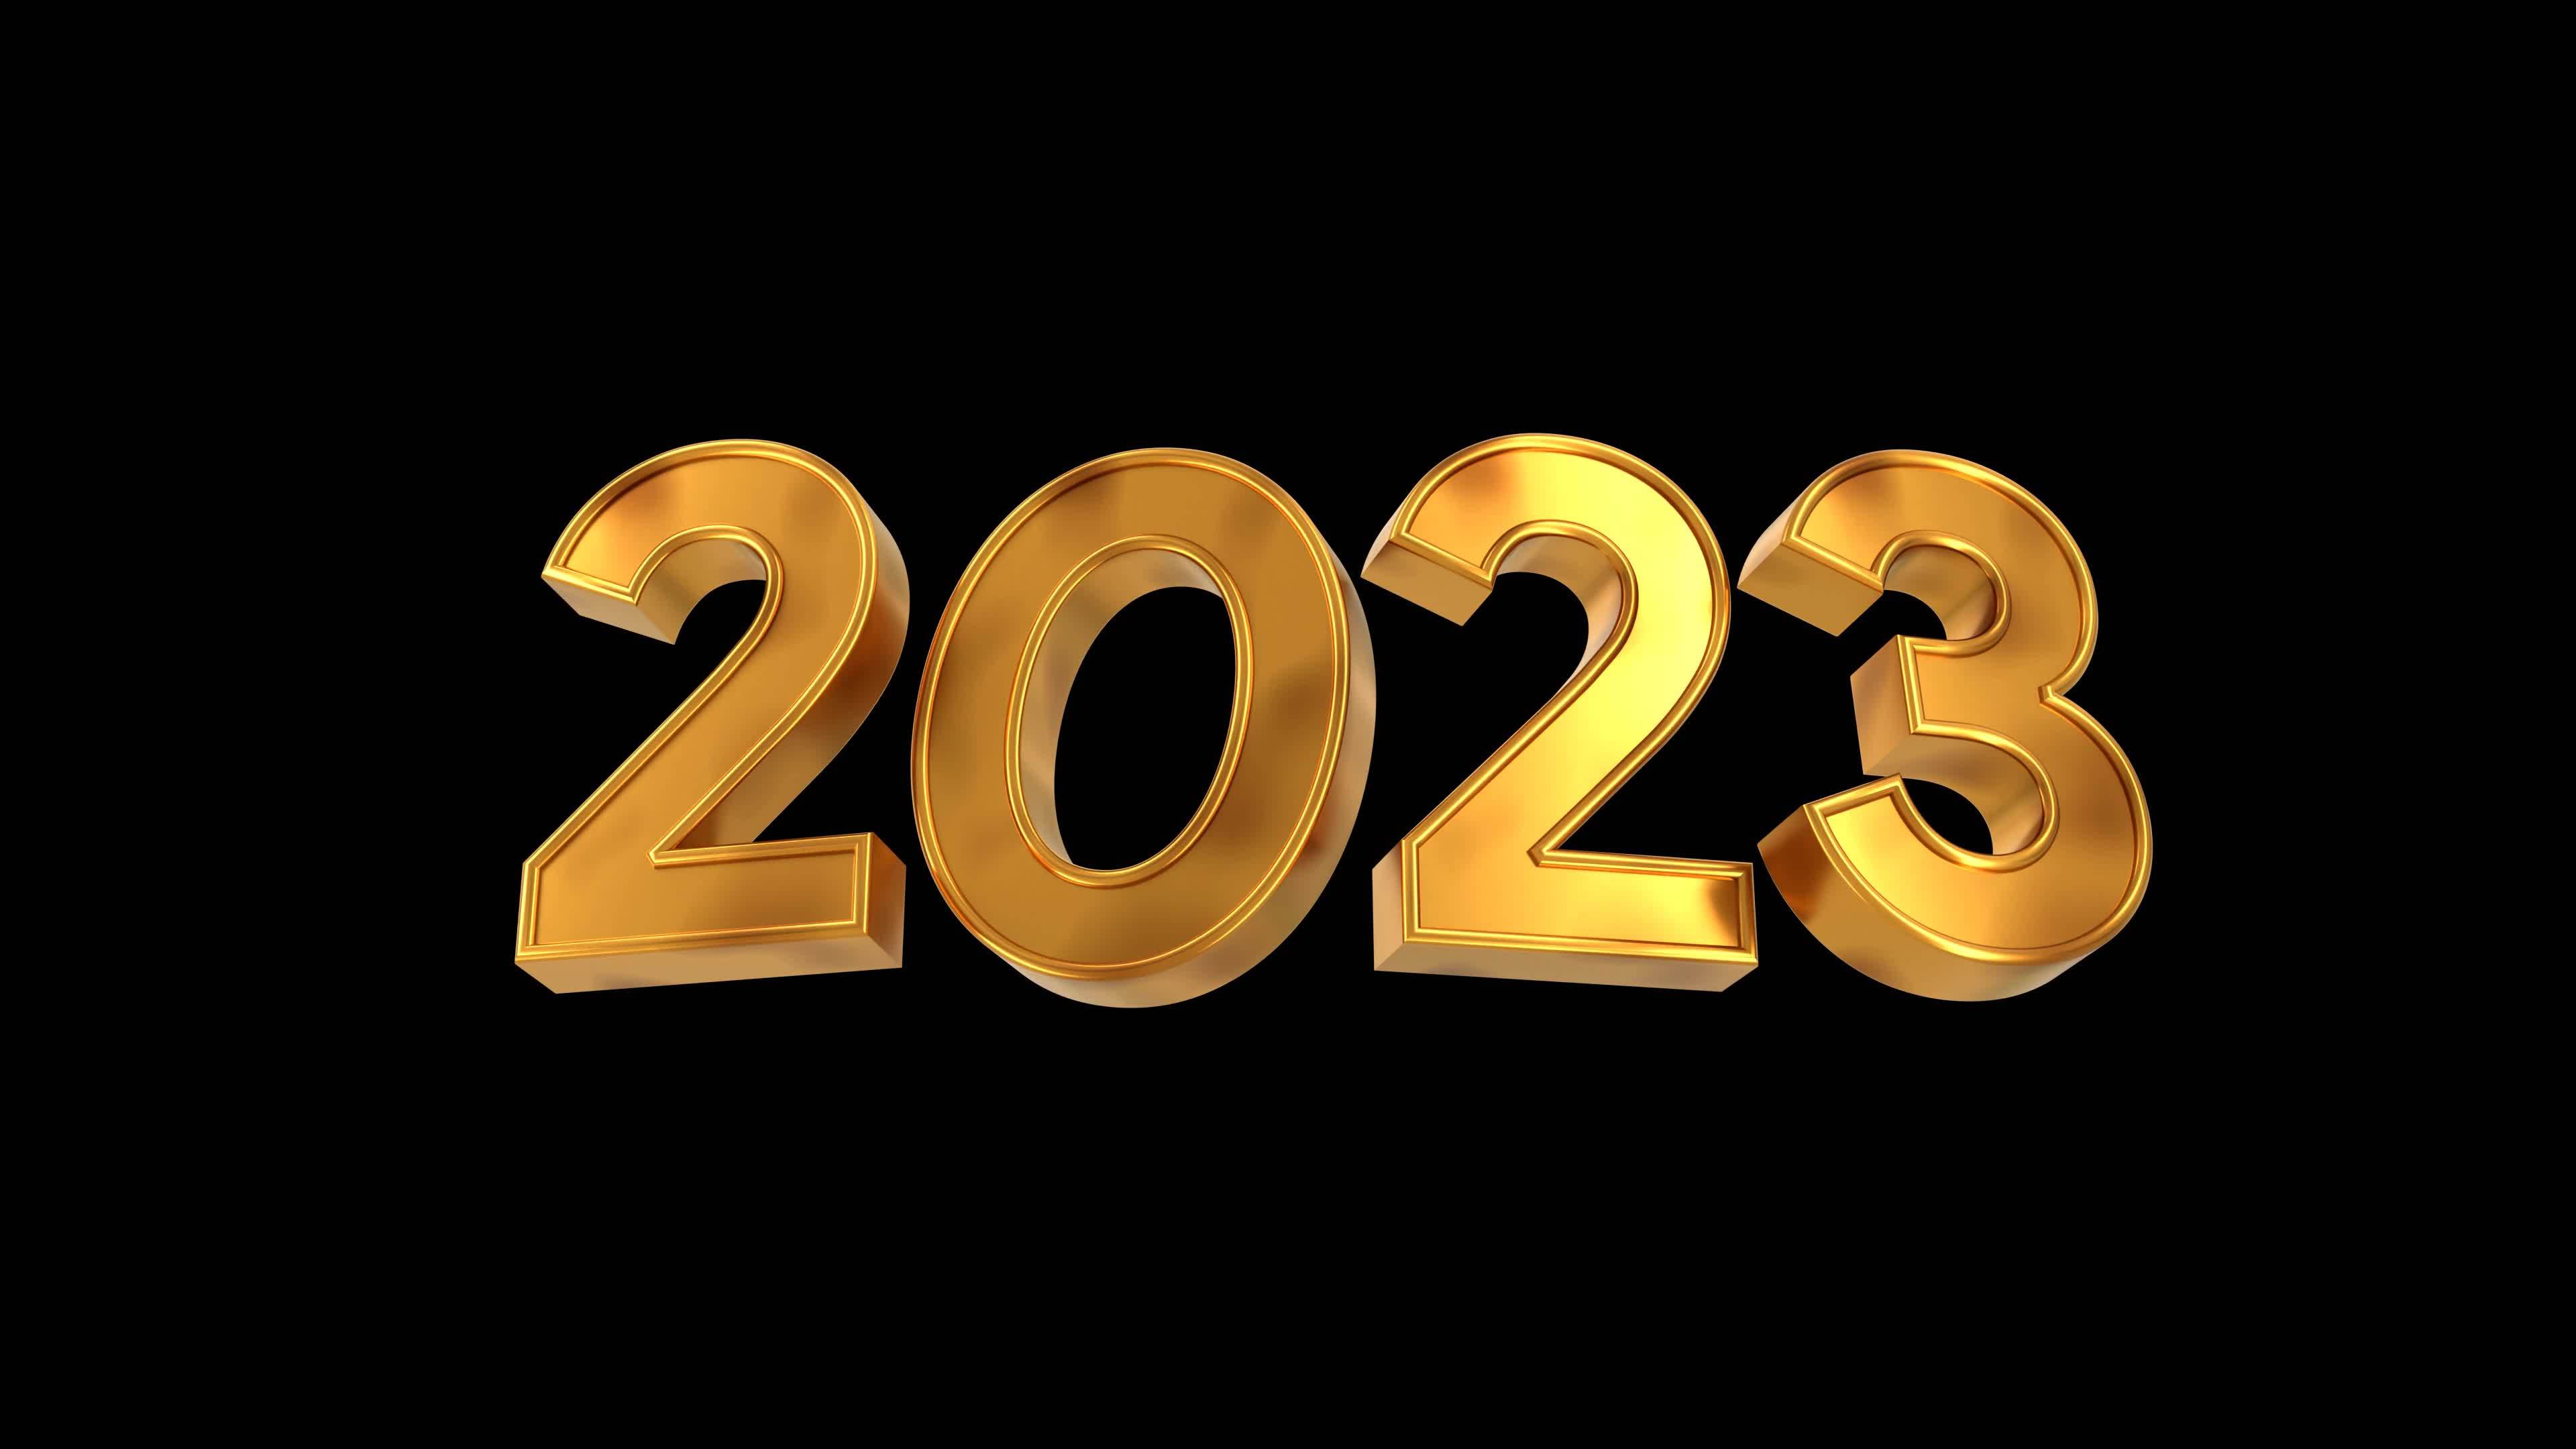 happy new year 2023 gold text with black isolated background 3D illustration rendering 4k resolution video